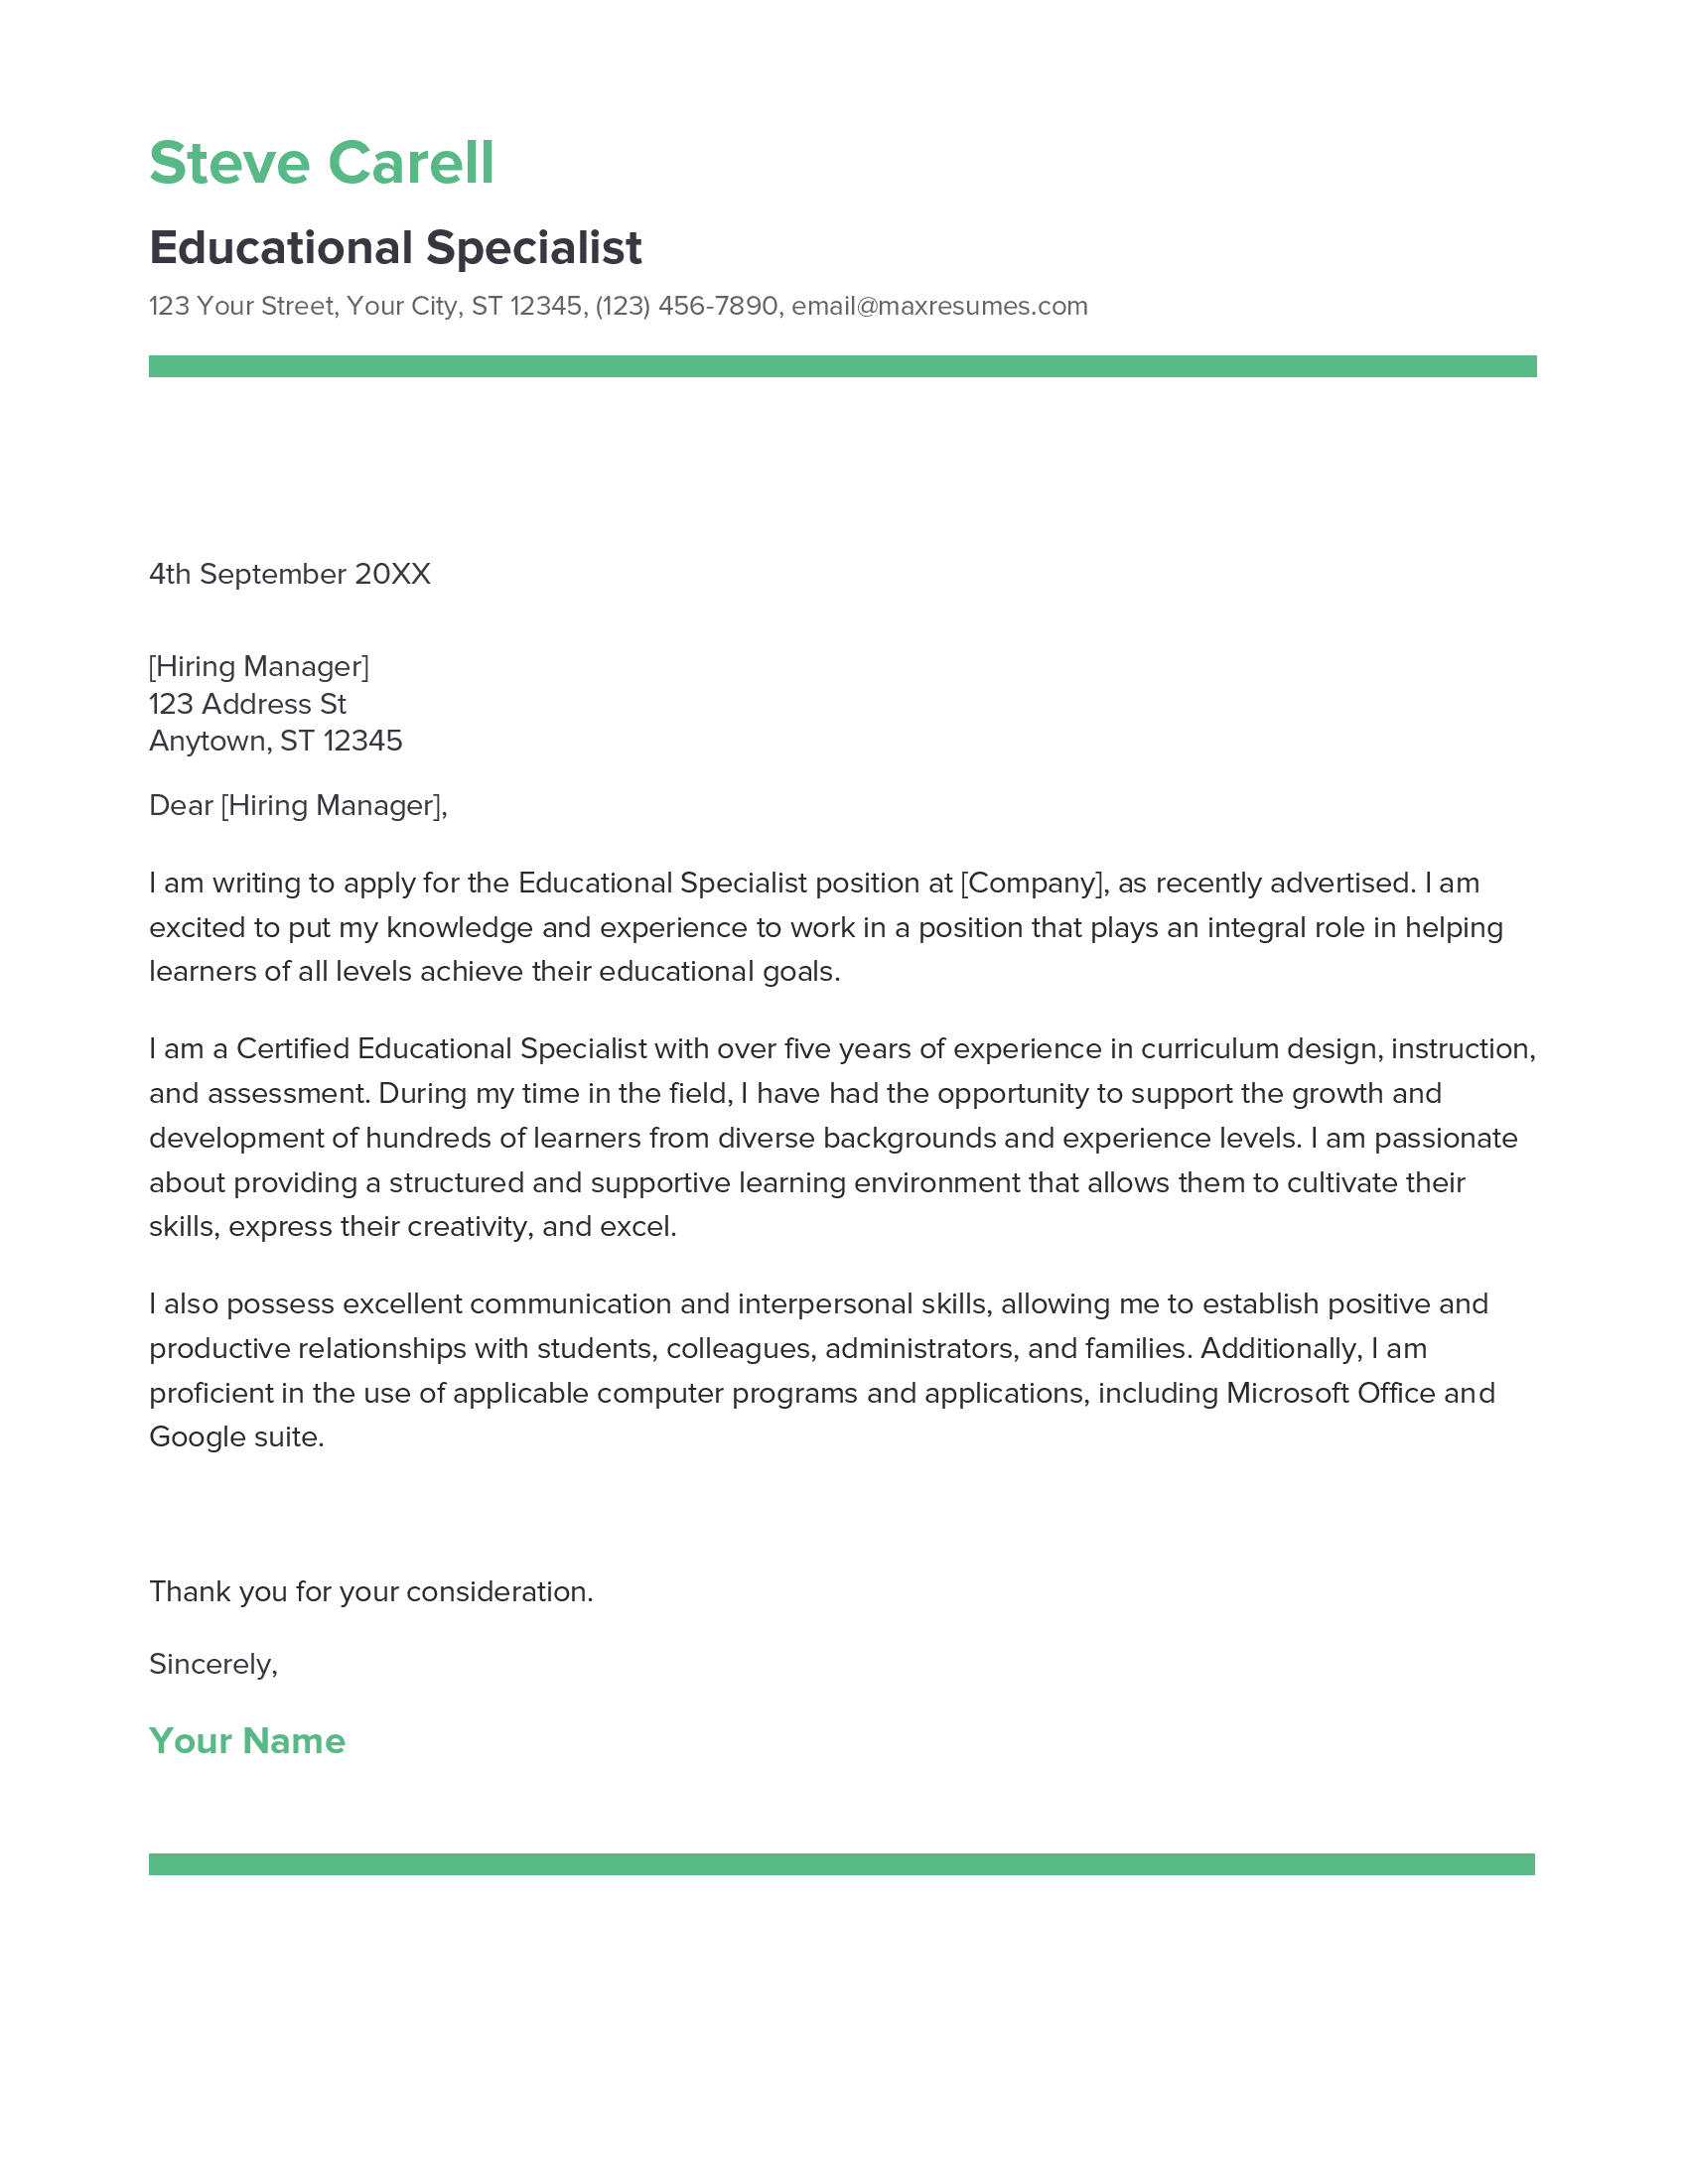 Educational Specialist Cover Letter Example